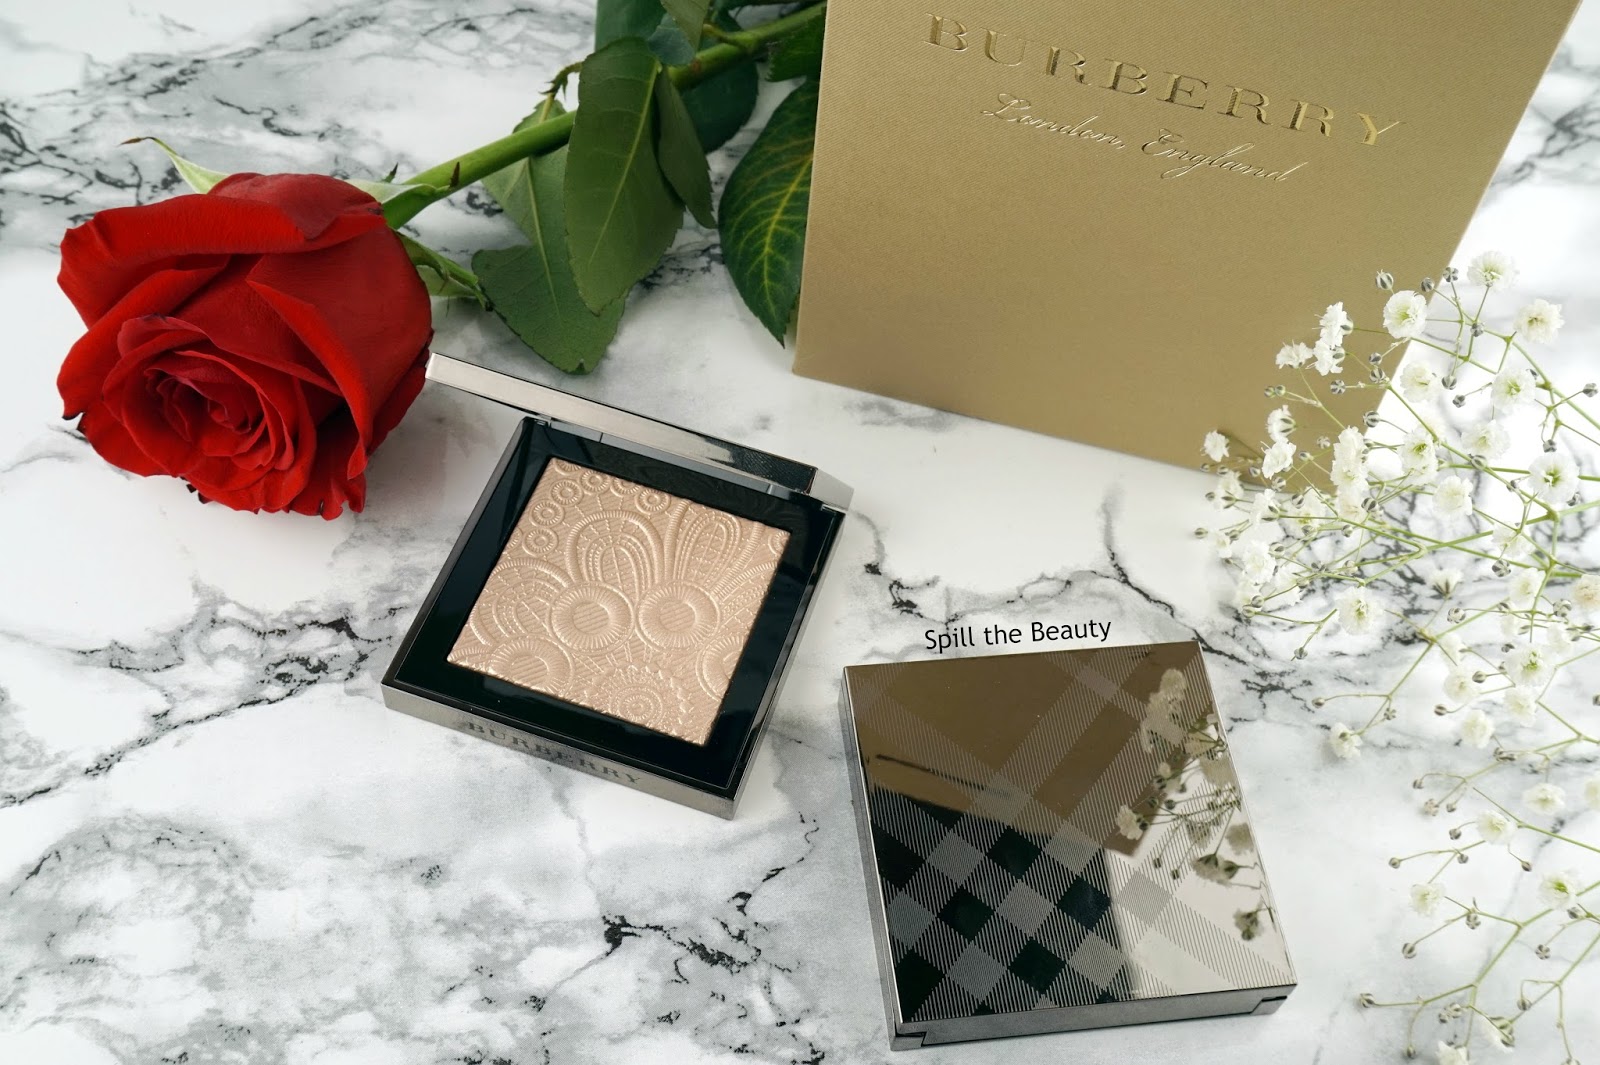 Burberry Fresh Glow Highlighter in ‘Pink Pearl’ and ‘Rose Gold’ – Review, Swatches, and Look